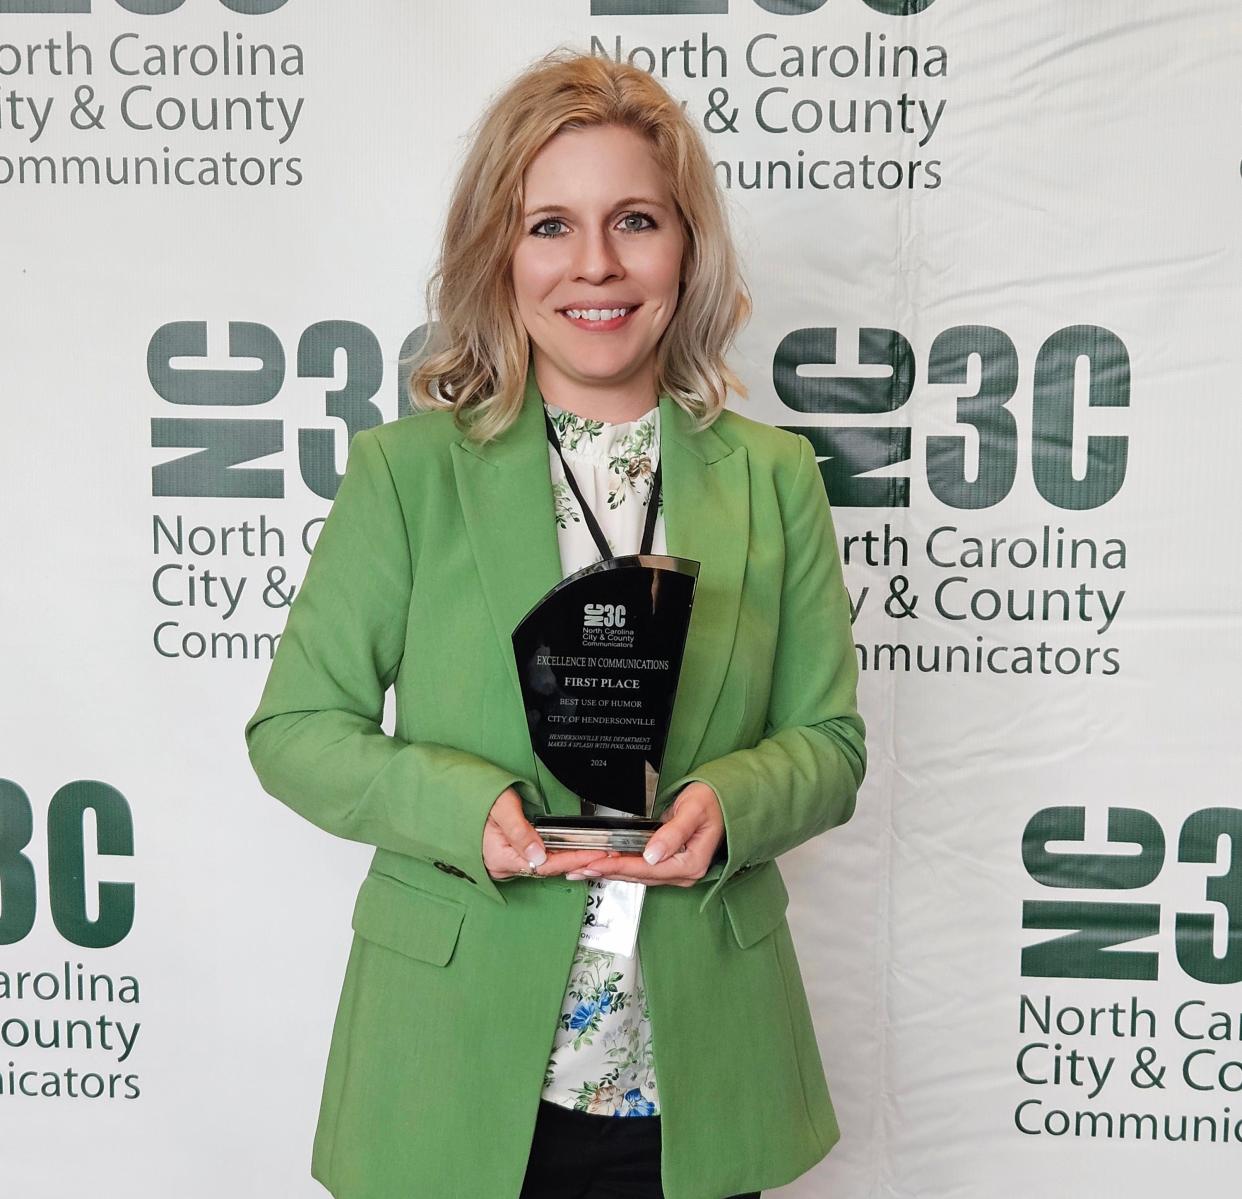 City of Hendersonville Communications Coordinator Brandy Heatherly poses with her NC3C communicators conference "Best of Humor" award she won for her April Fool's social media post where firefighters were using pool noodles instead of hoses to put out fires.